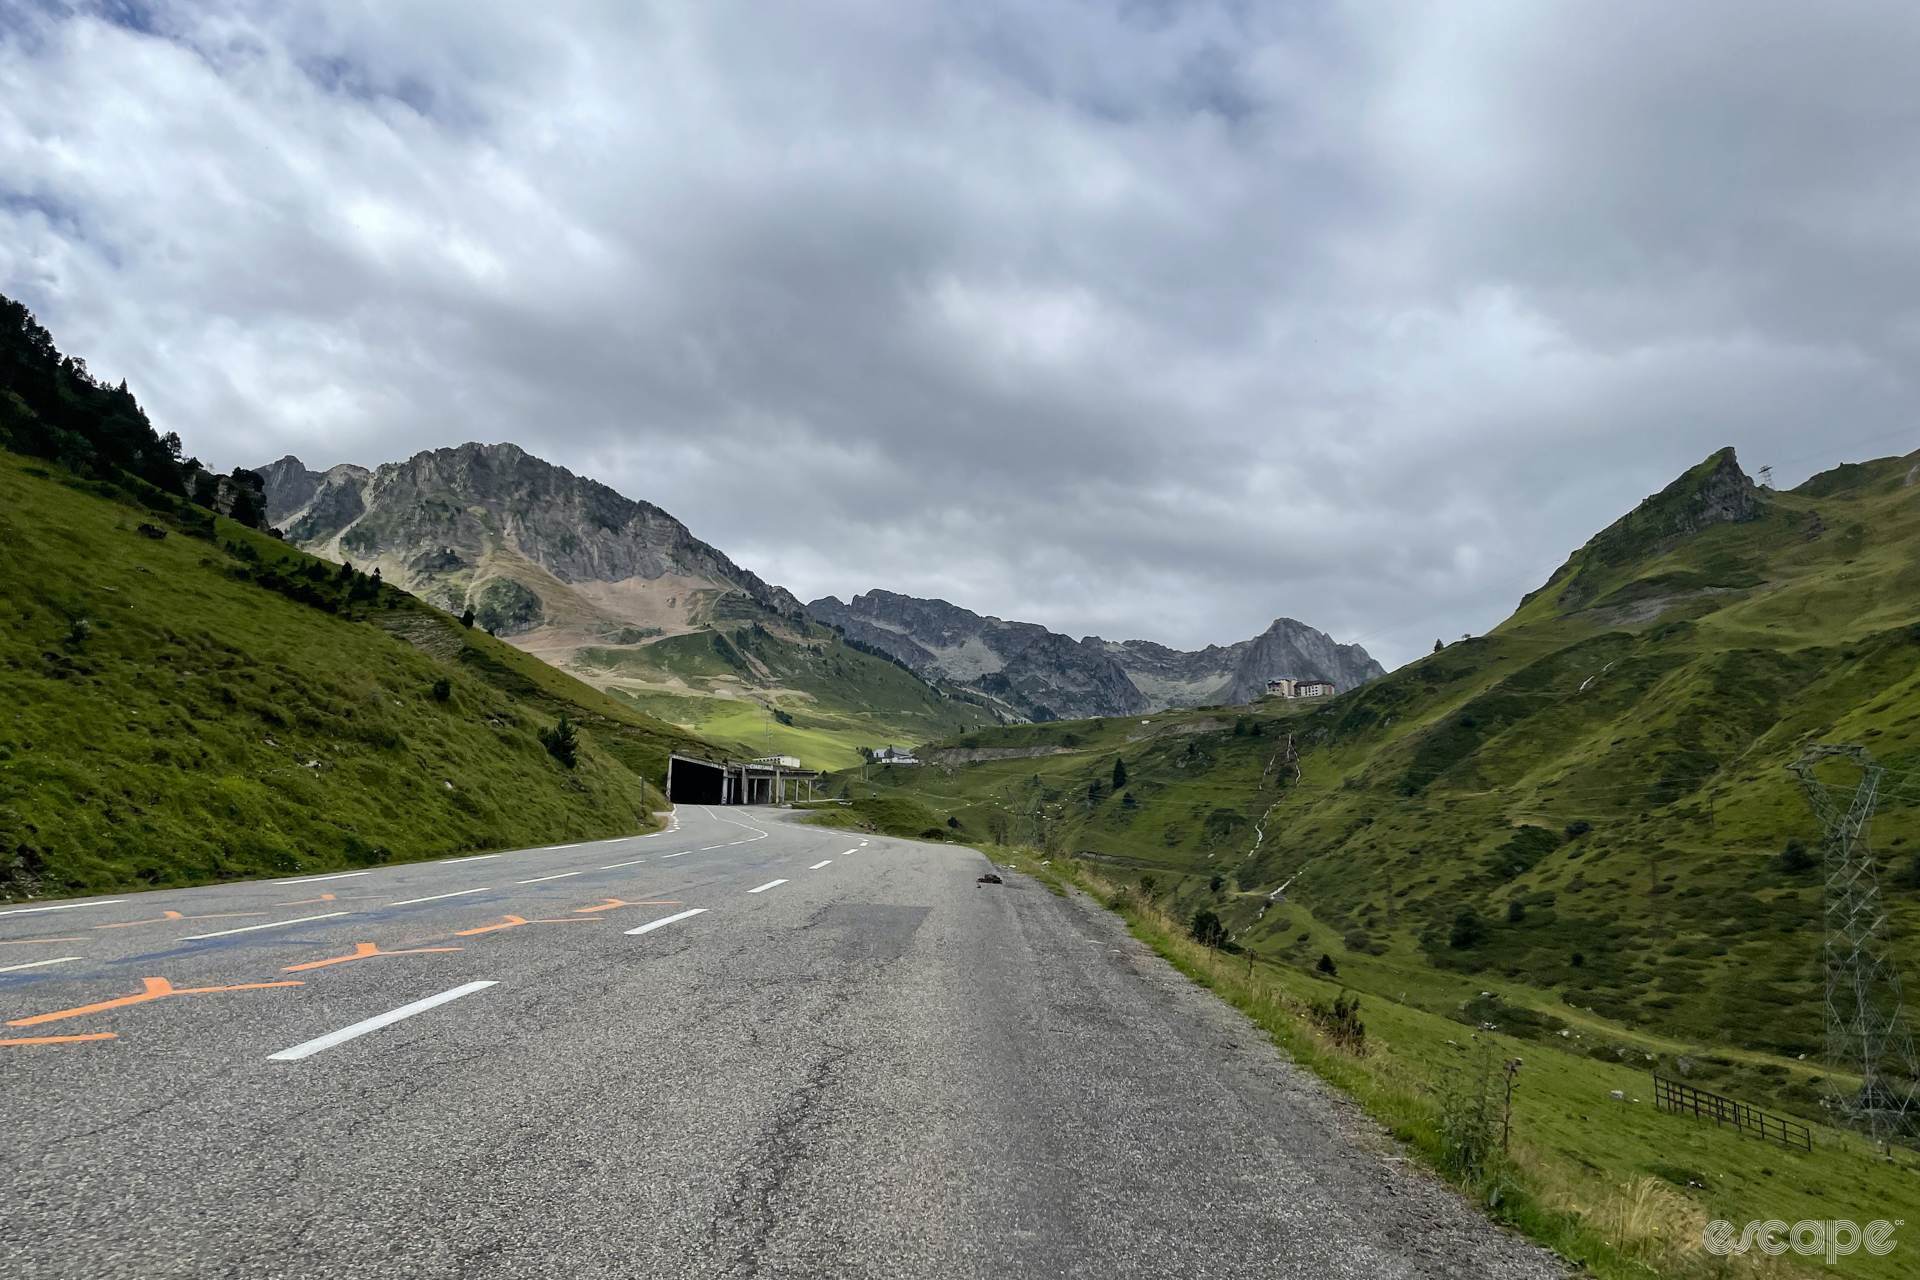 The climb up the Col du Tourmalet, looking toward the Pyreneean massif while approaching a tunnel.